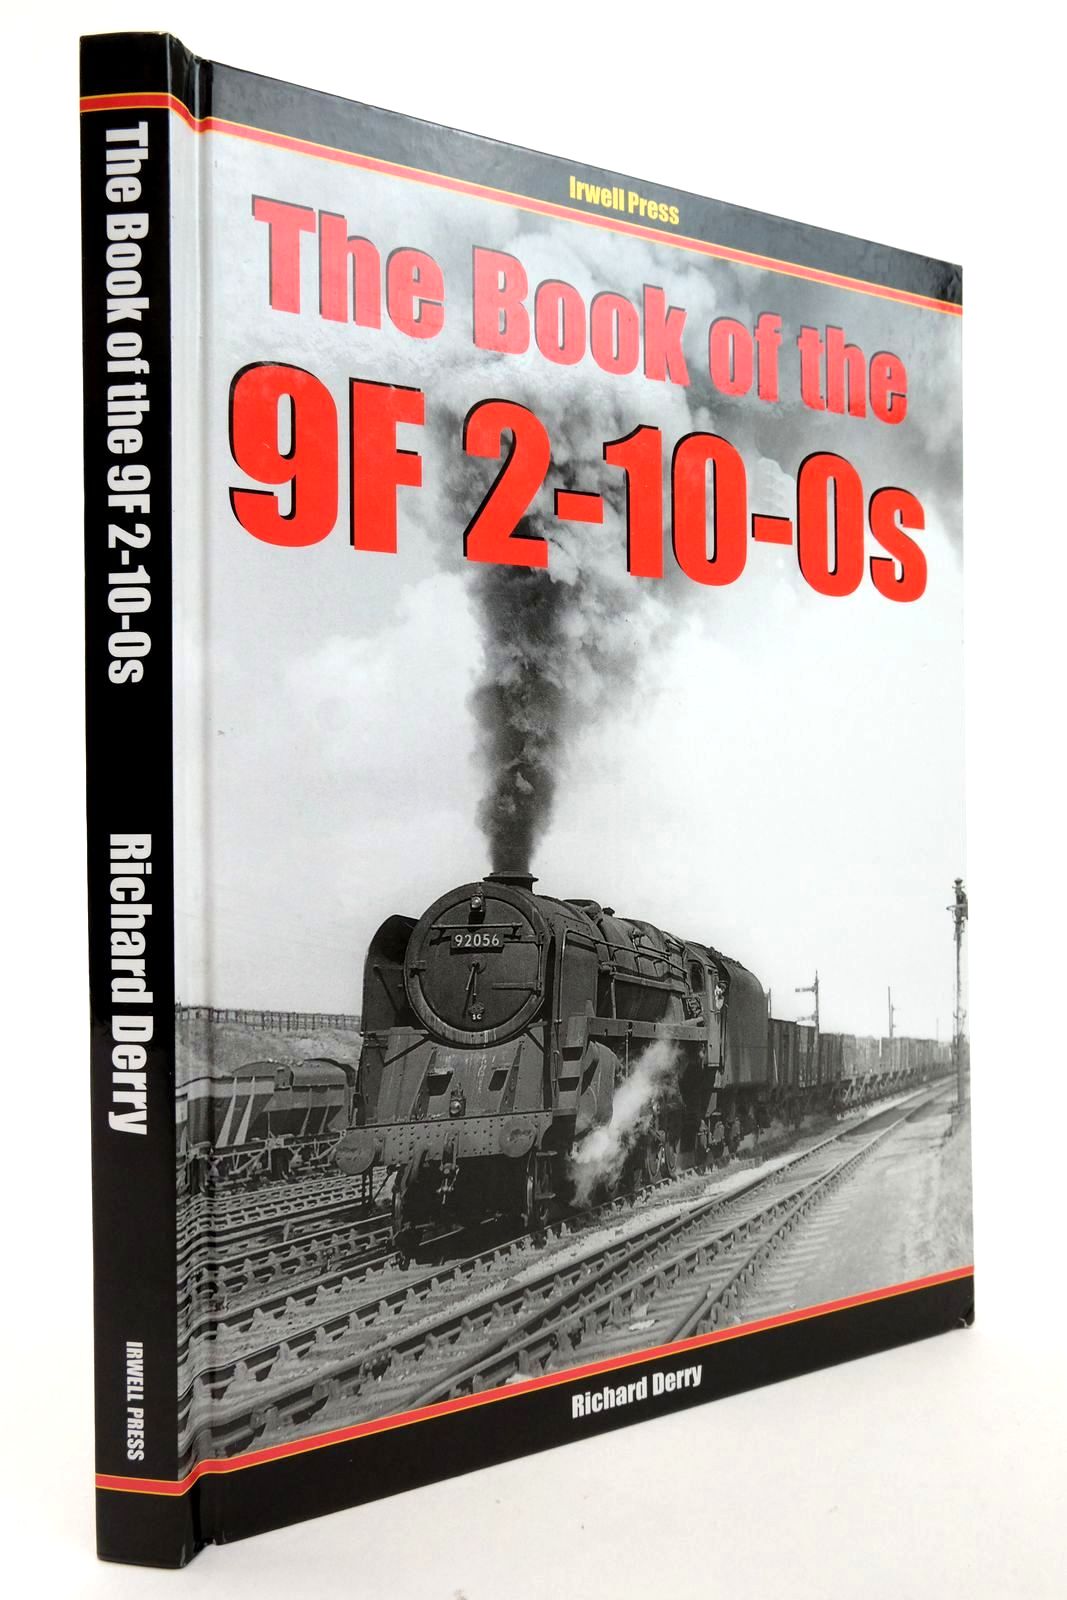 Photo of THE BOOK OF THE 9F 2-10-0S- Stock Number: 2136649